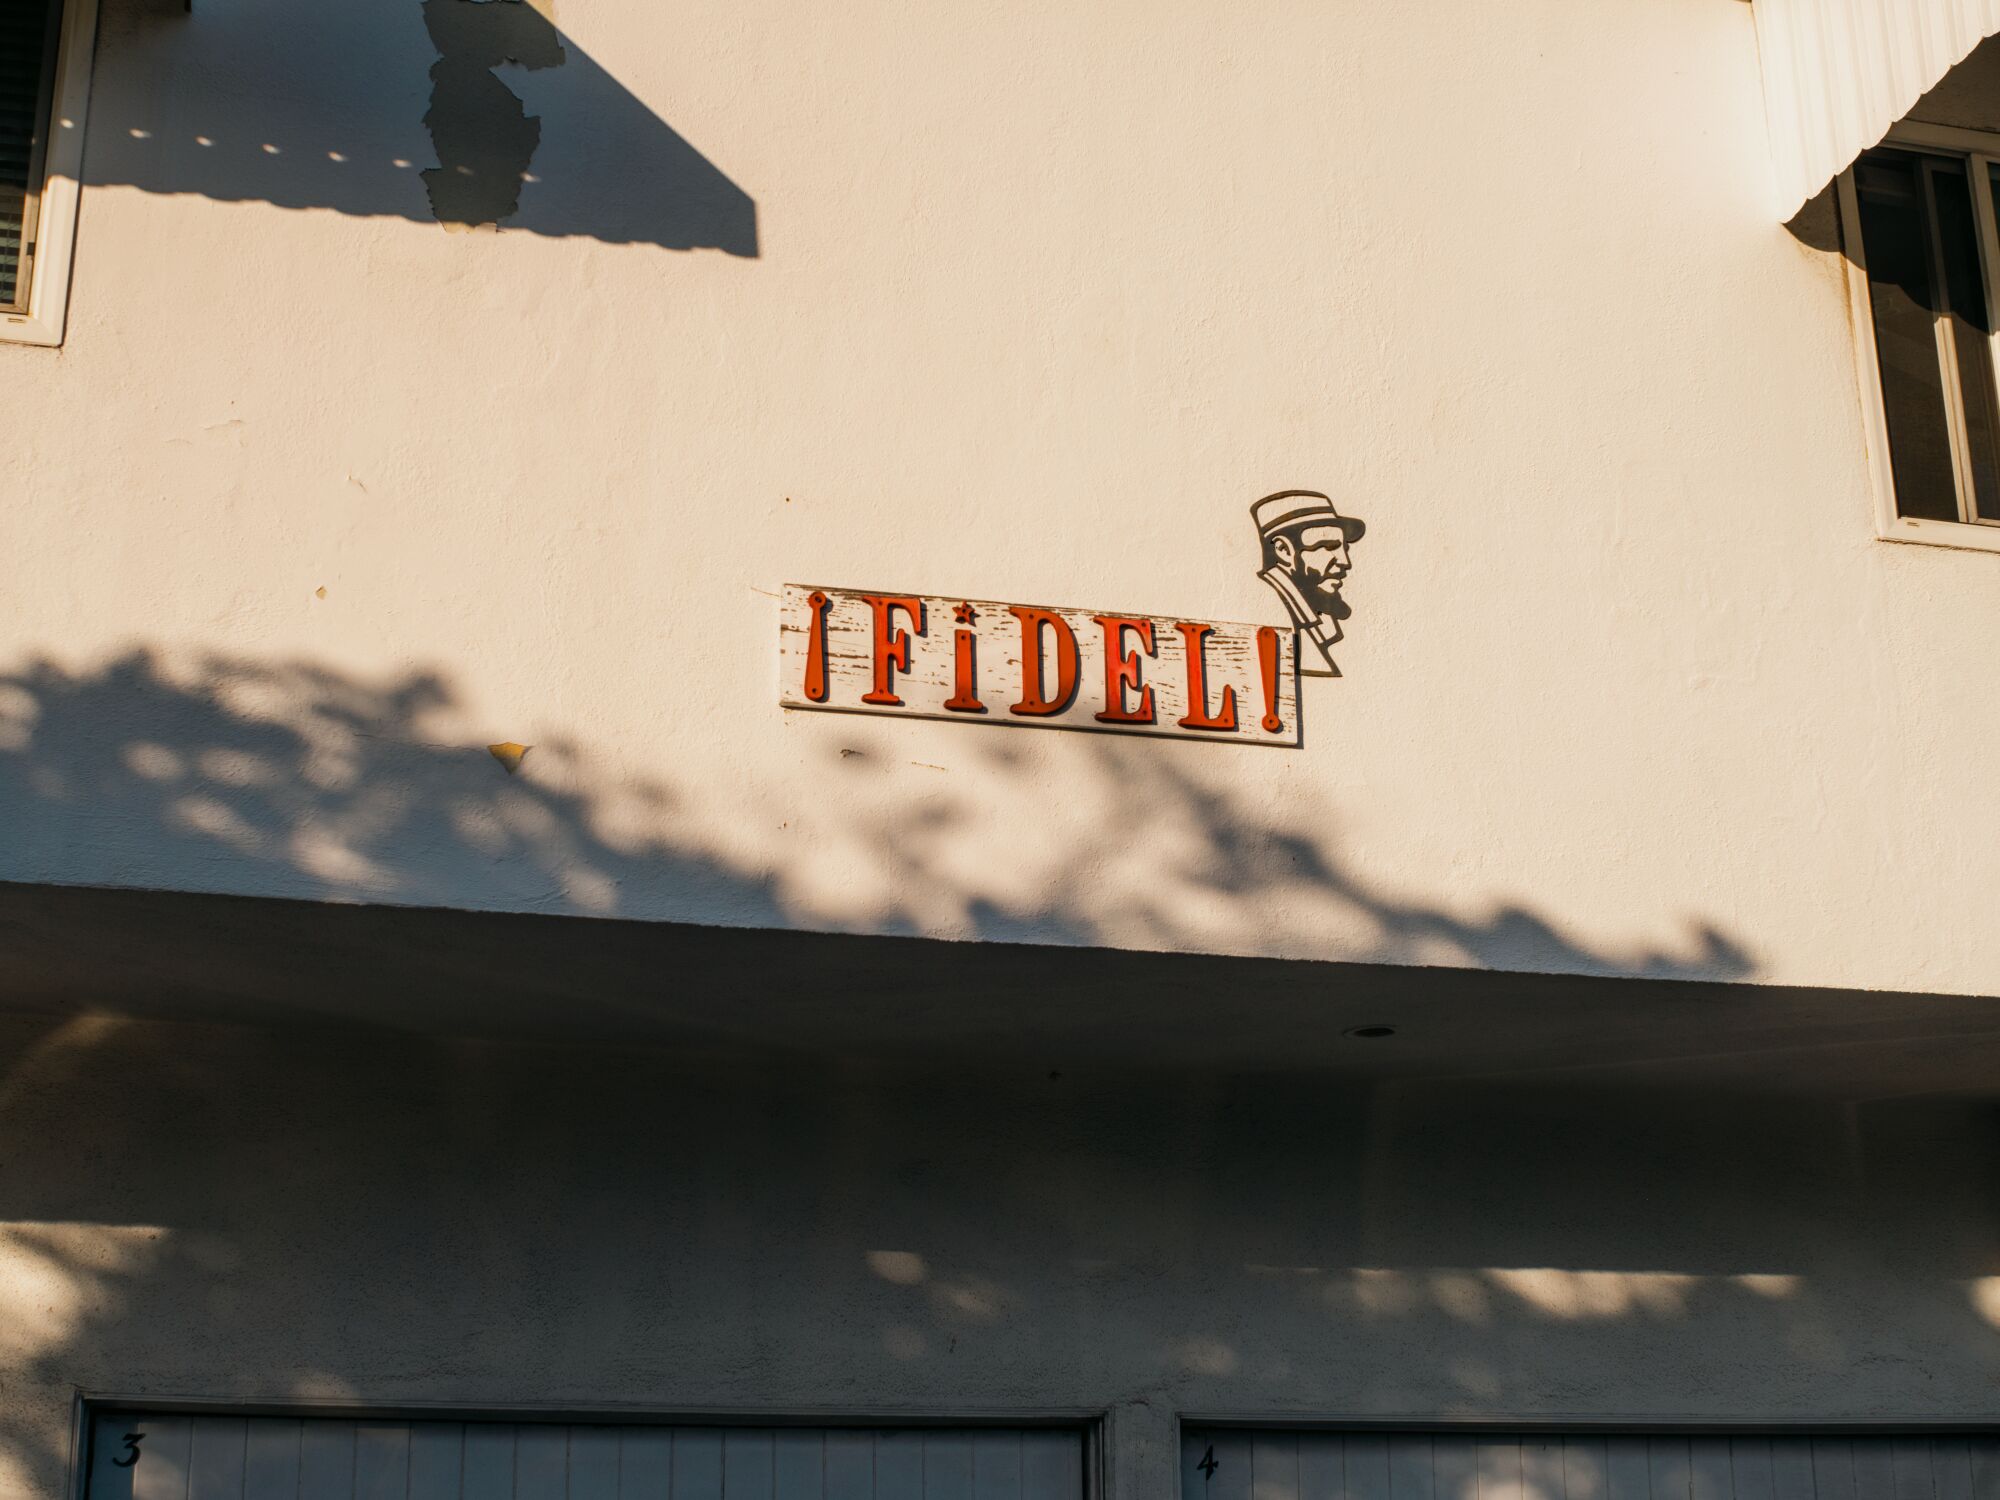 Apartment building sign that reads ”¡Fidel!”